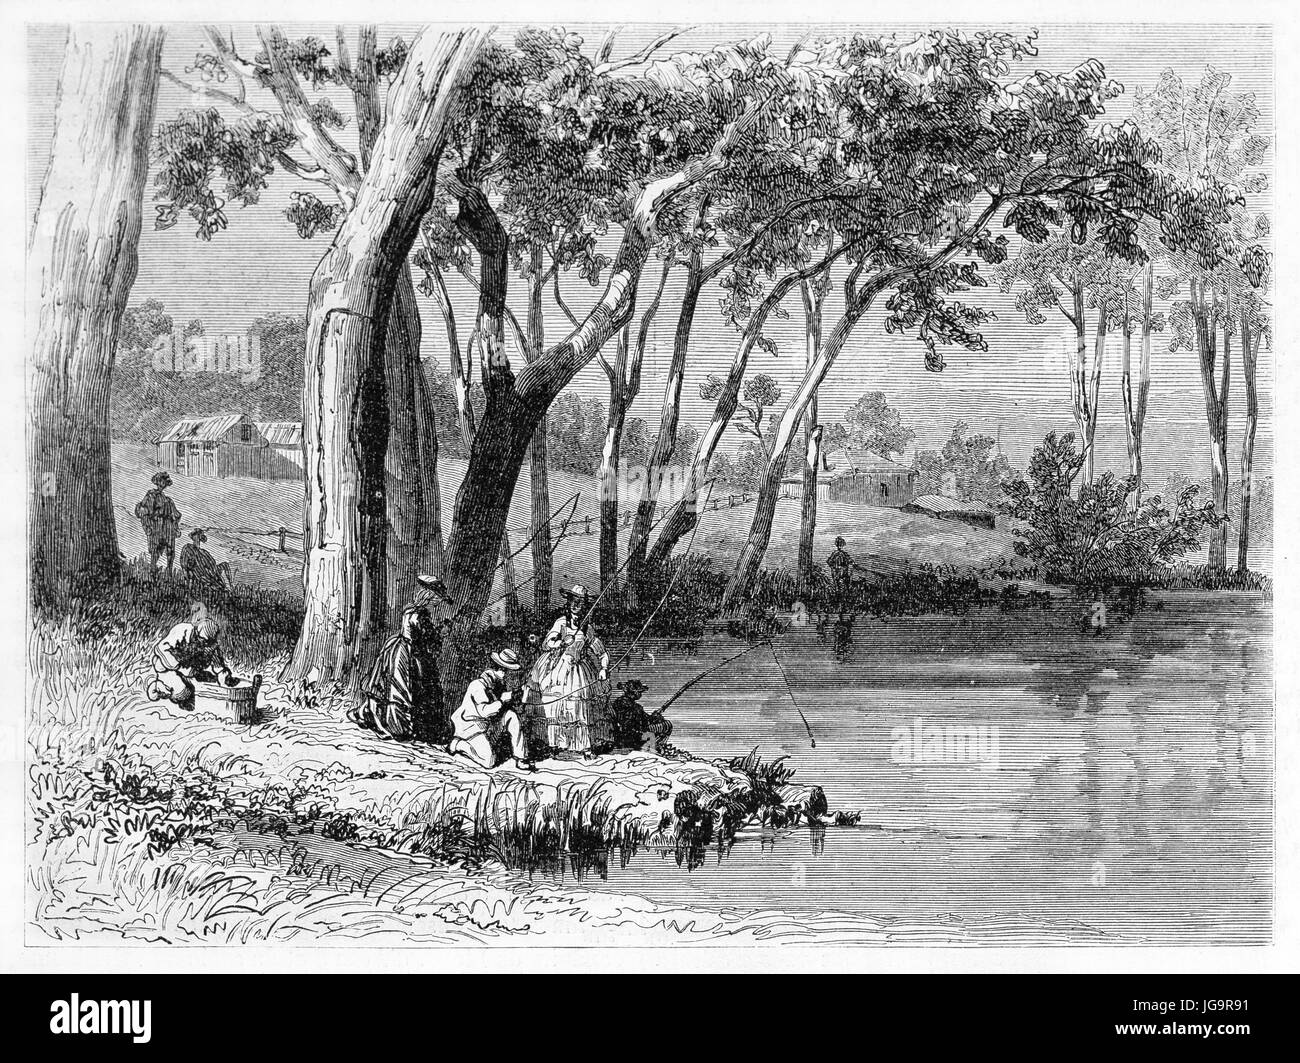 Old illustration of people angling along a river in Victoria region, Australia. Created by Girardet after De Castella,  published on Le Tour du Monde, Stock Photo